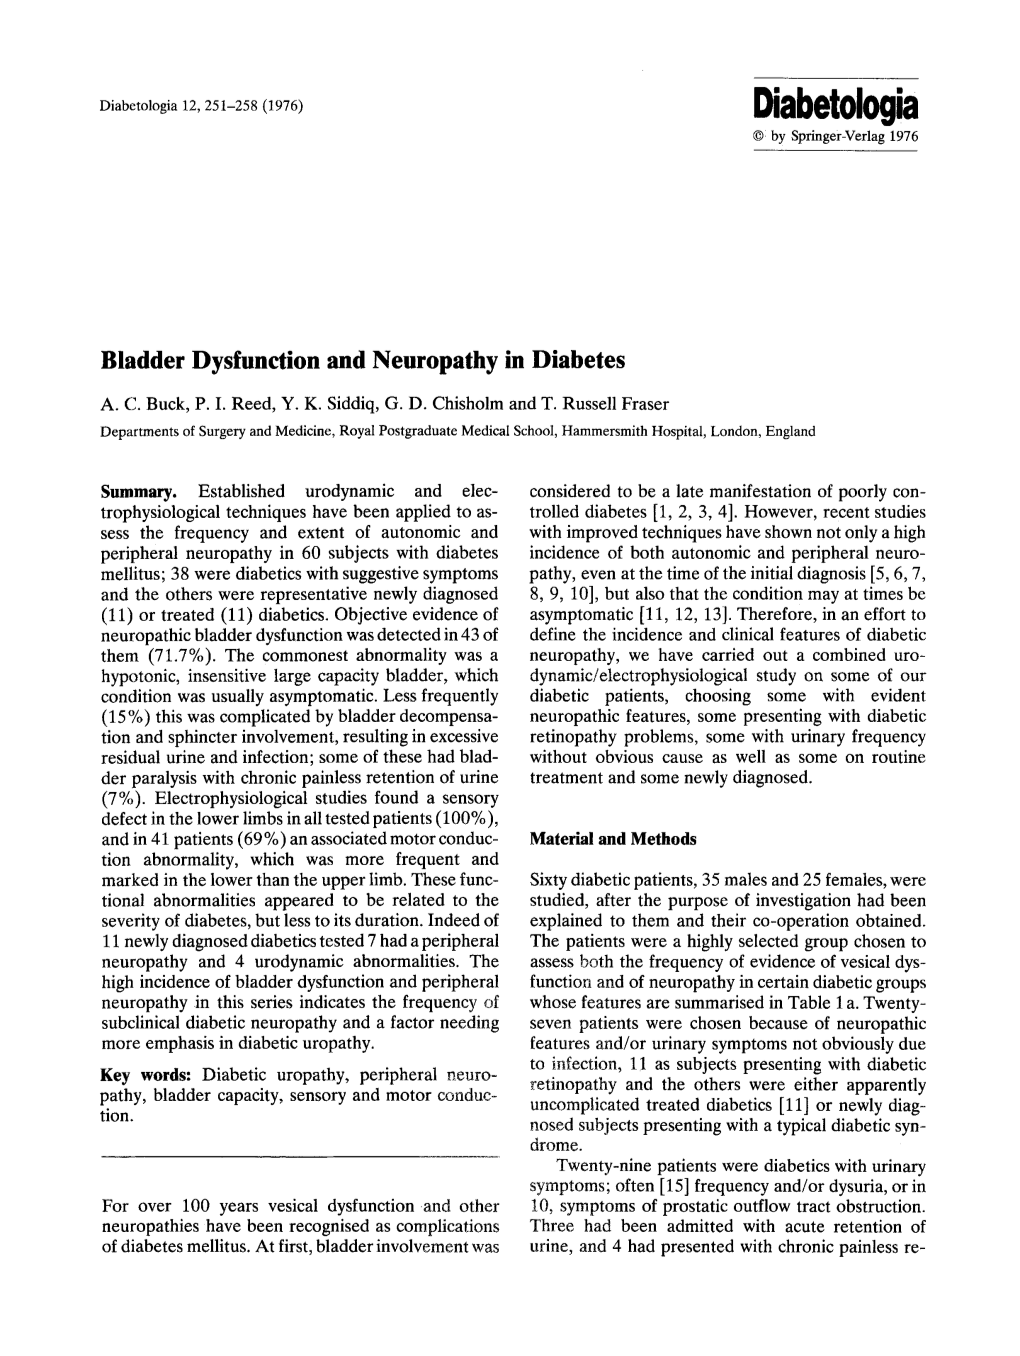 Bladder Dysfunction and Neuropathy in Diabetes